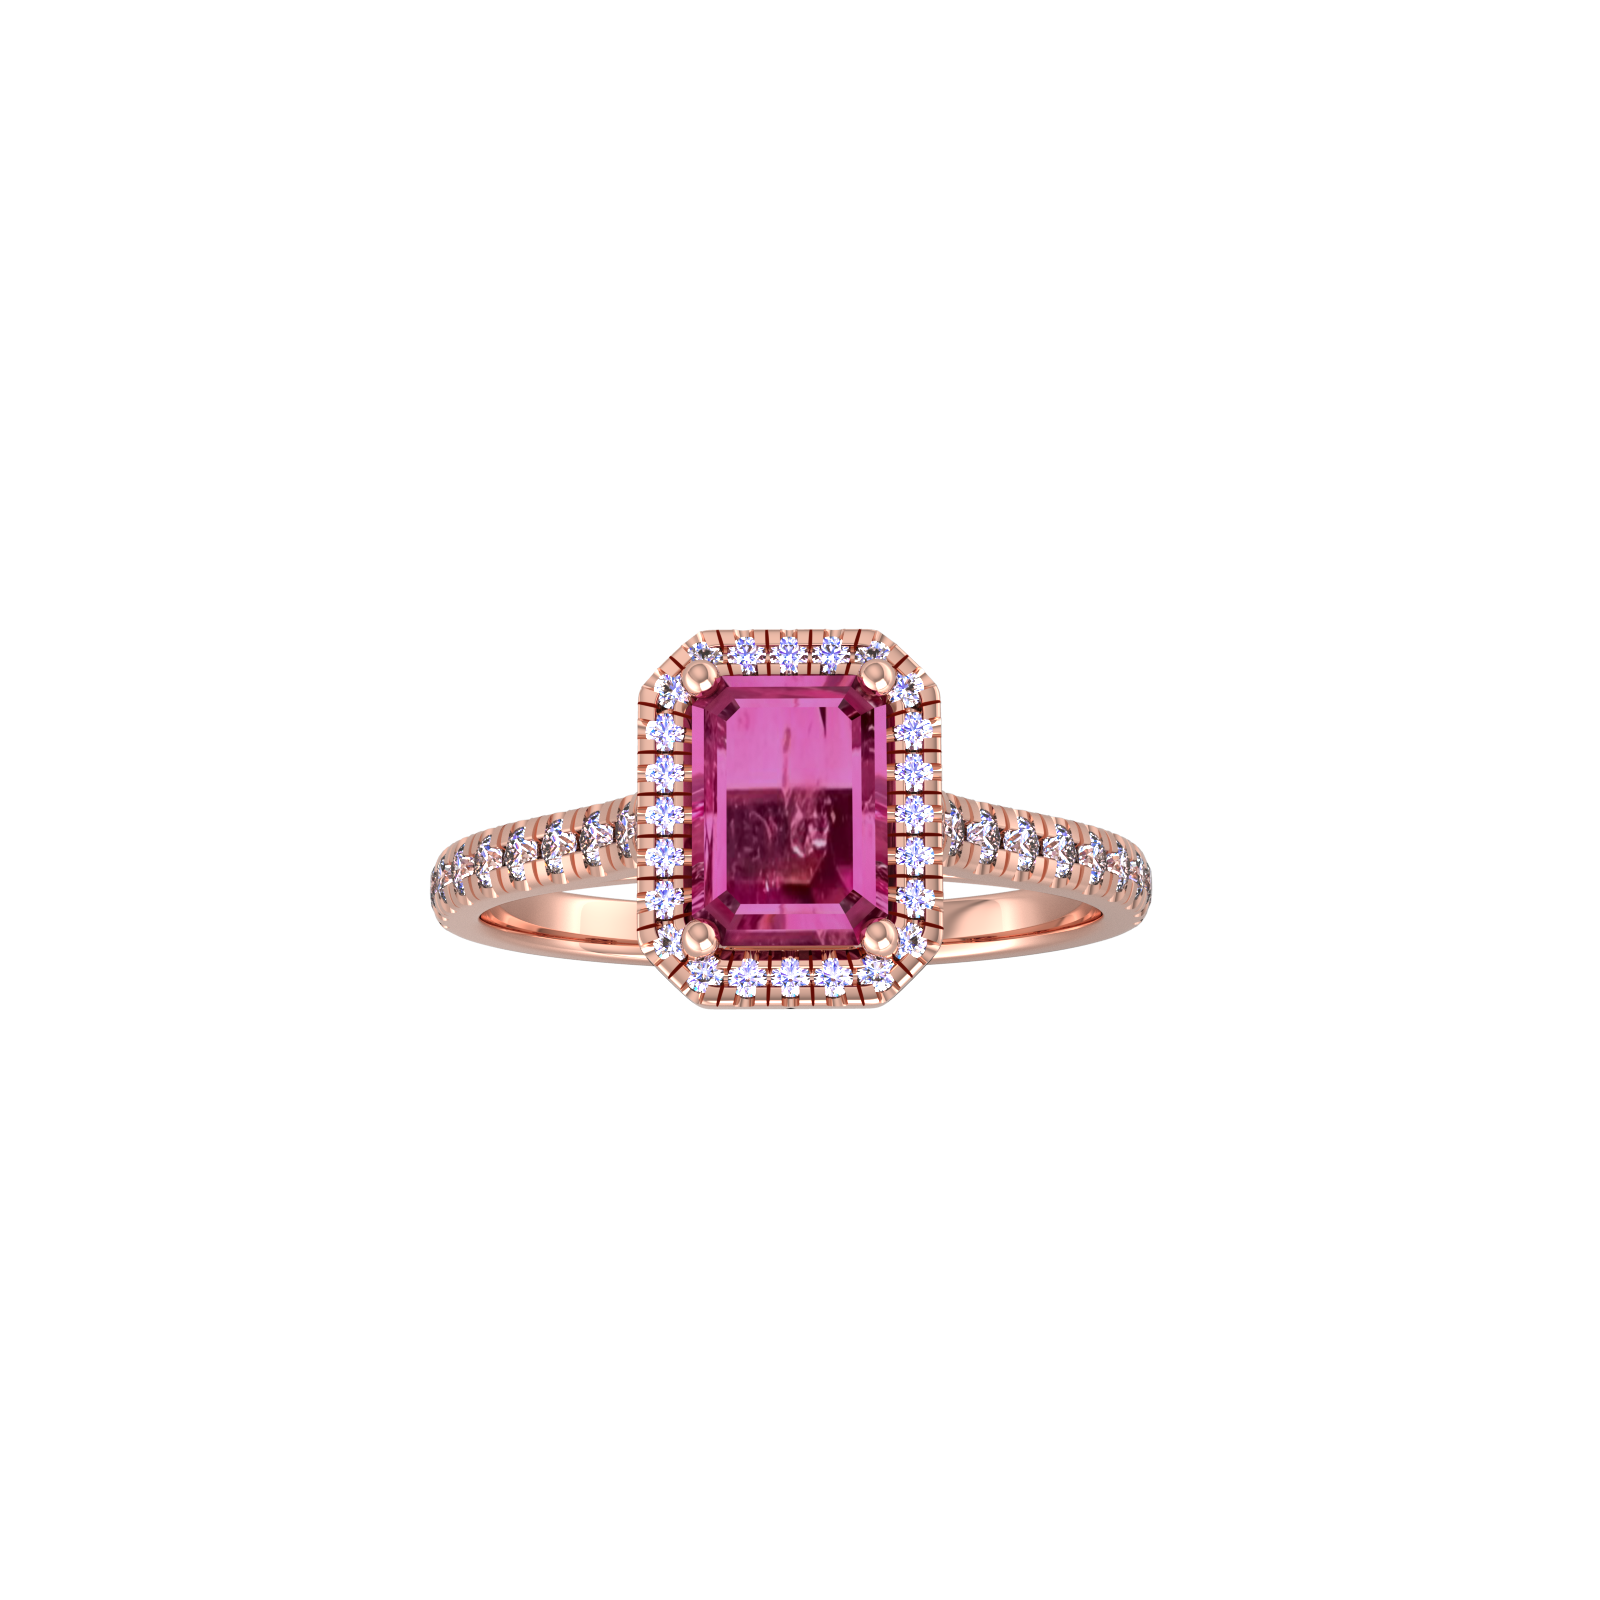 9ct Rose Gold Pink Tourmaline & Diamond Halo Ring with Diamond Shoulders - Ring Size I.5